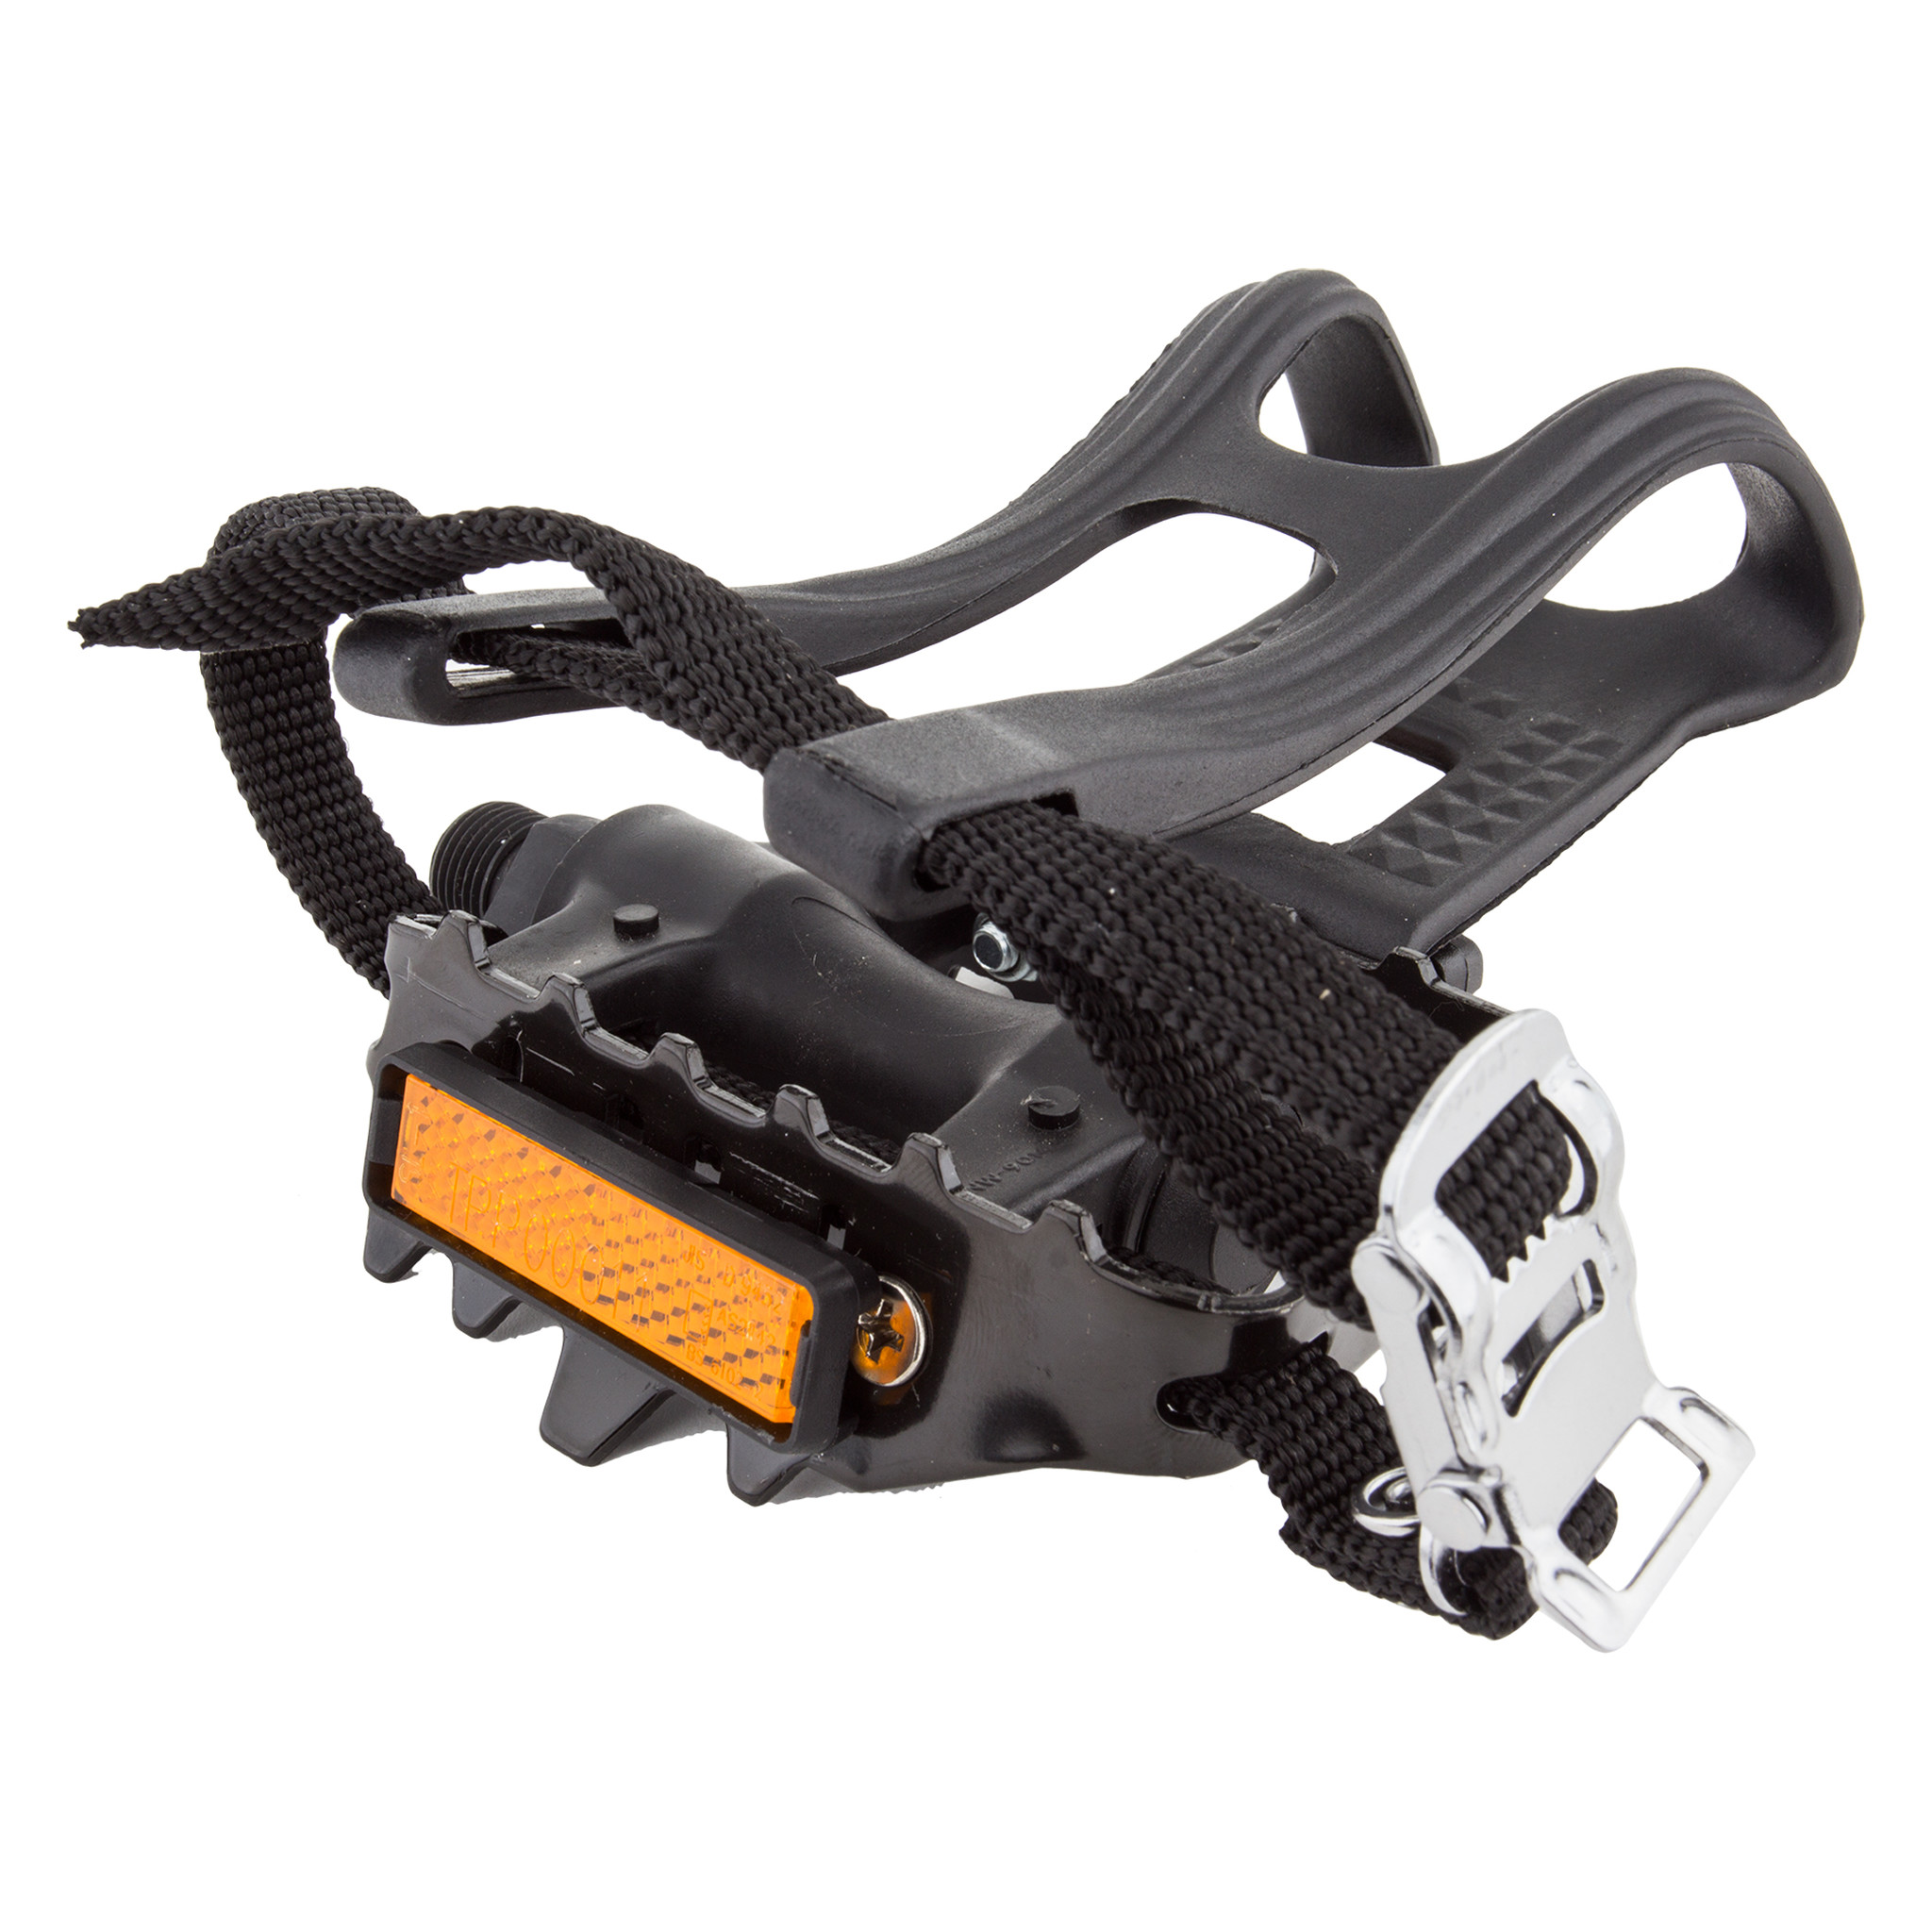 SUNLITE Sunlite - Low Profile Plastic ATB Pedals - w/ Toe Clips and Straps  - 9/16 Spindle - Black